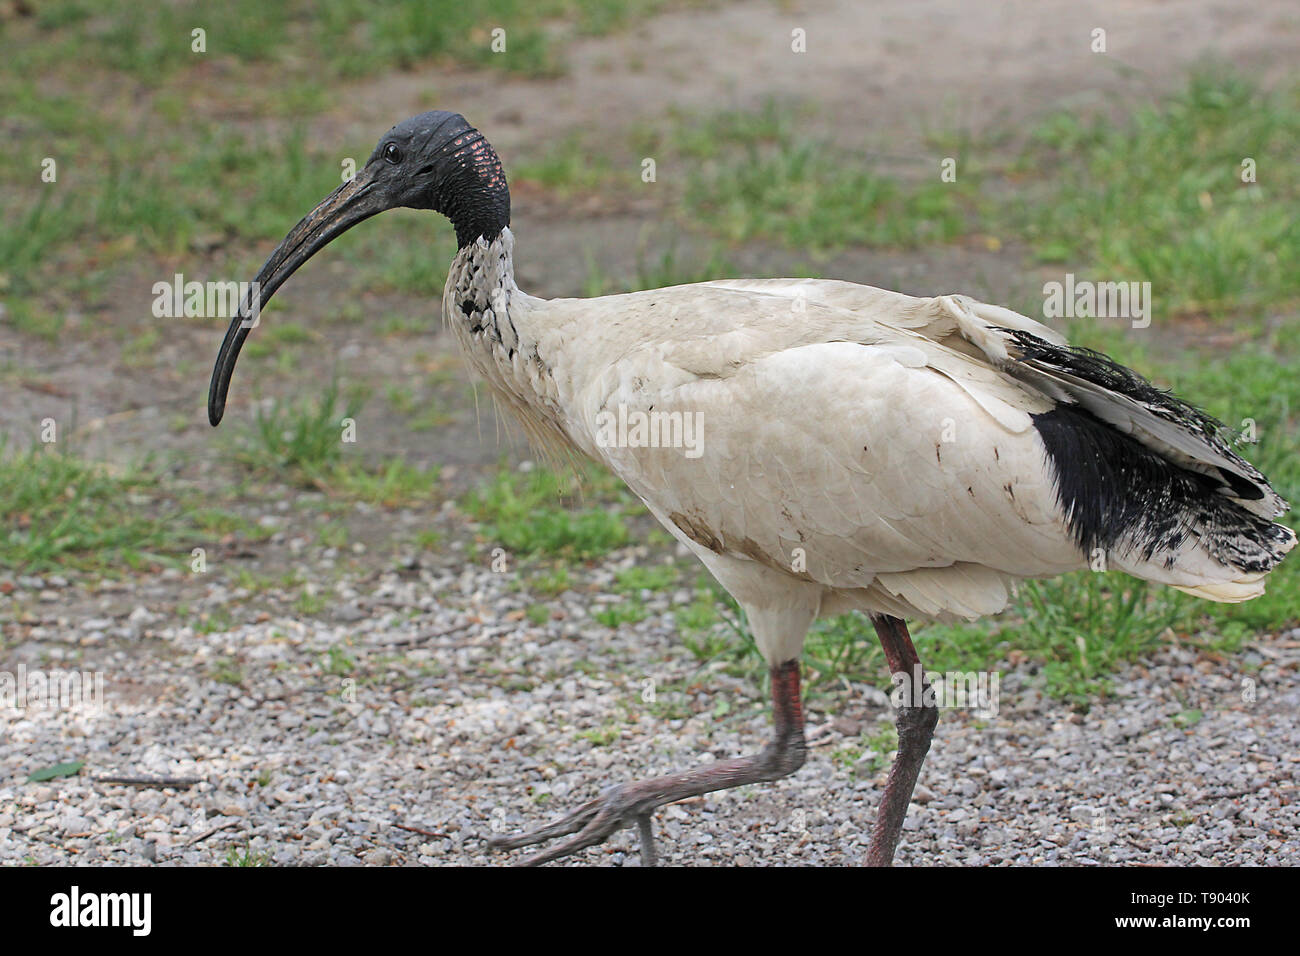 The Australian White Ibis, Threskiornis molucca. is identified by its almost entirely white body plumage and black head and neck. Stock Photo